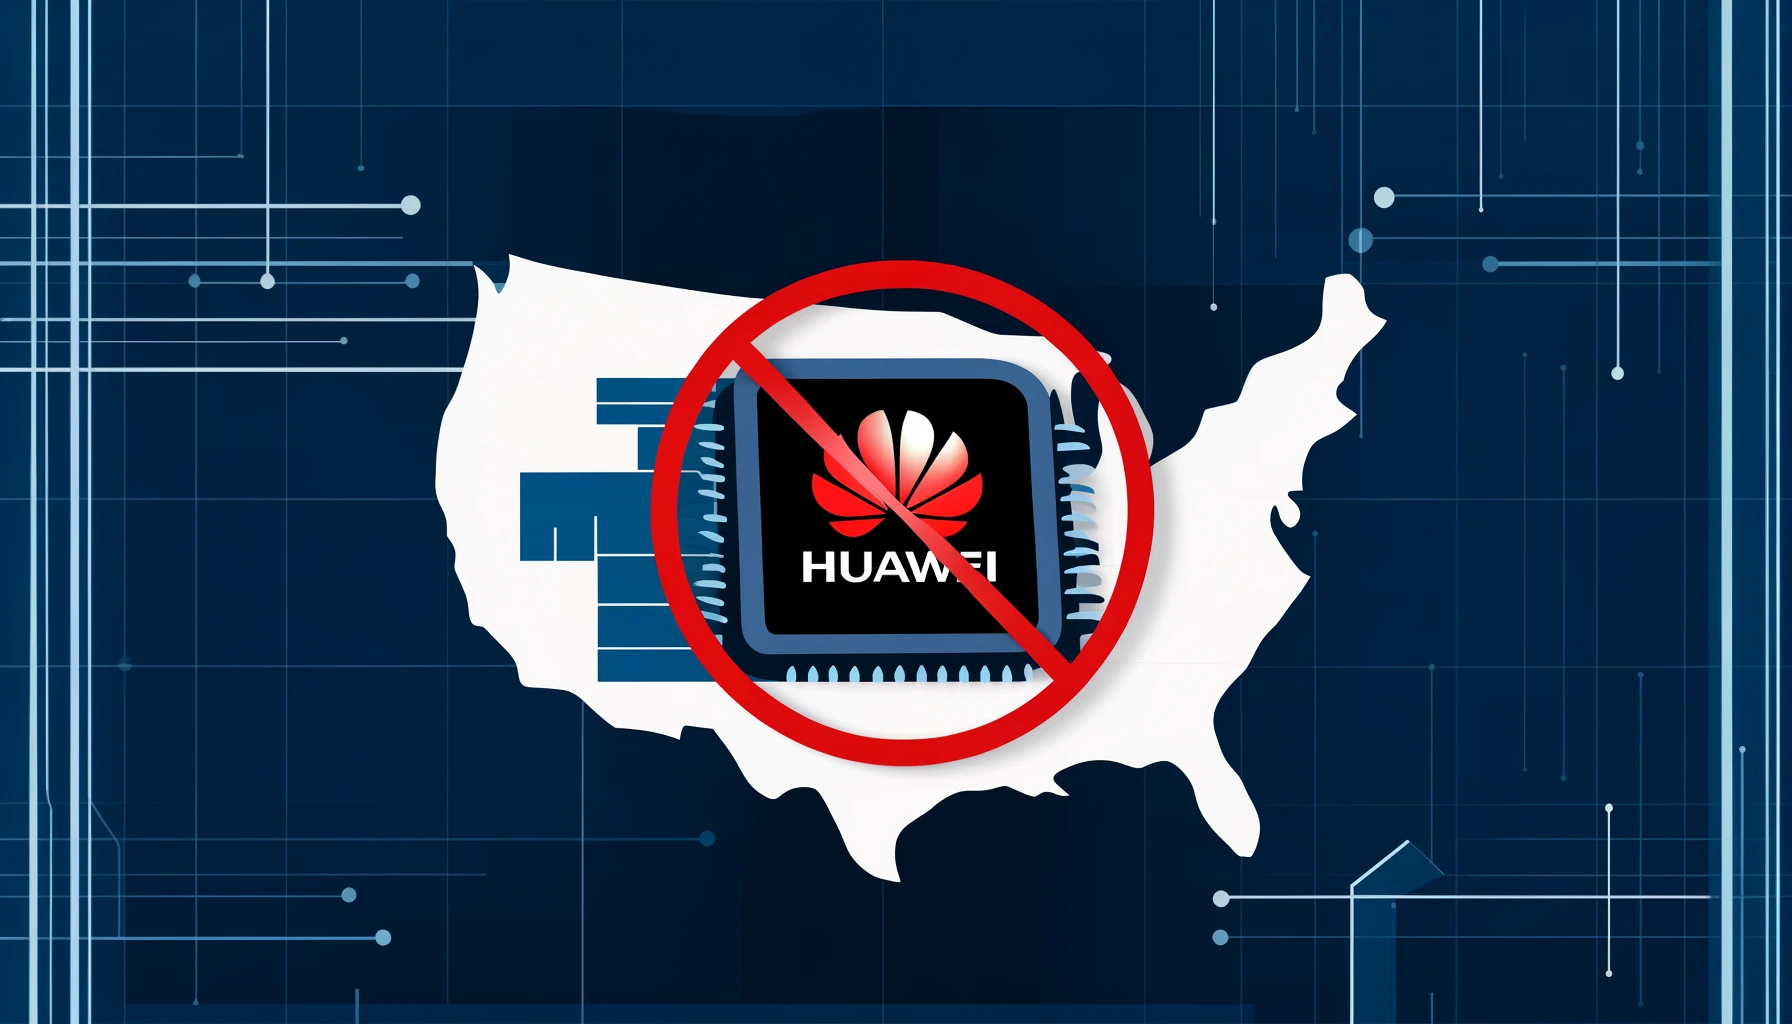 U.S. withdraws certain export permits for chip sales to Huawei, aiming to limit China’s technological influence.